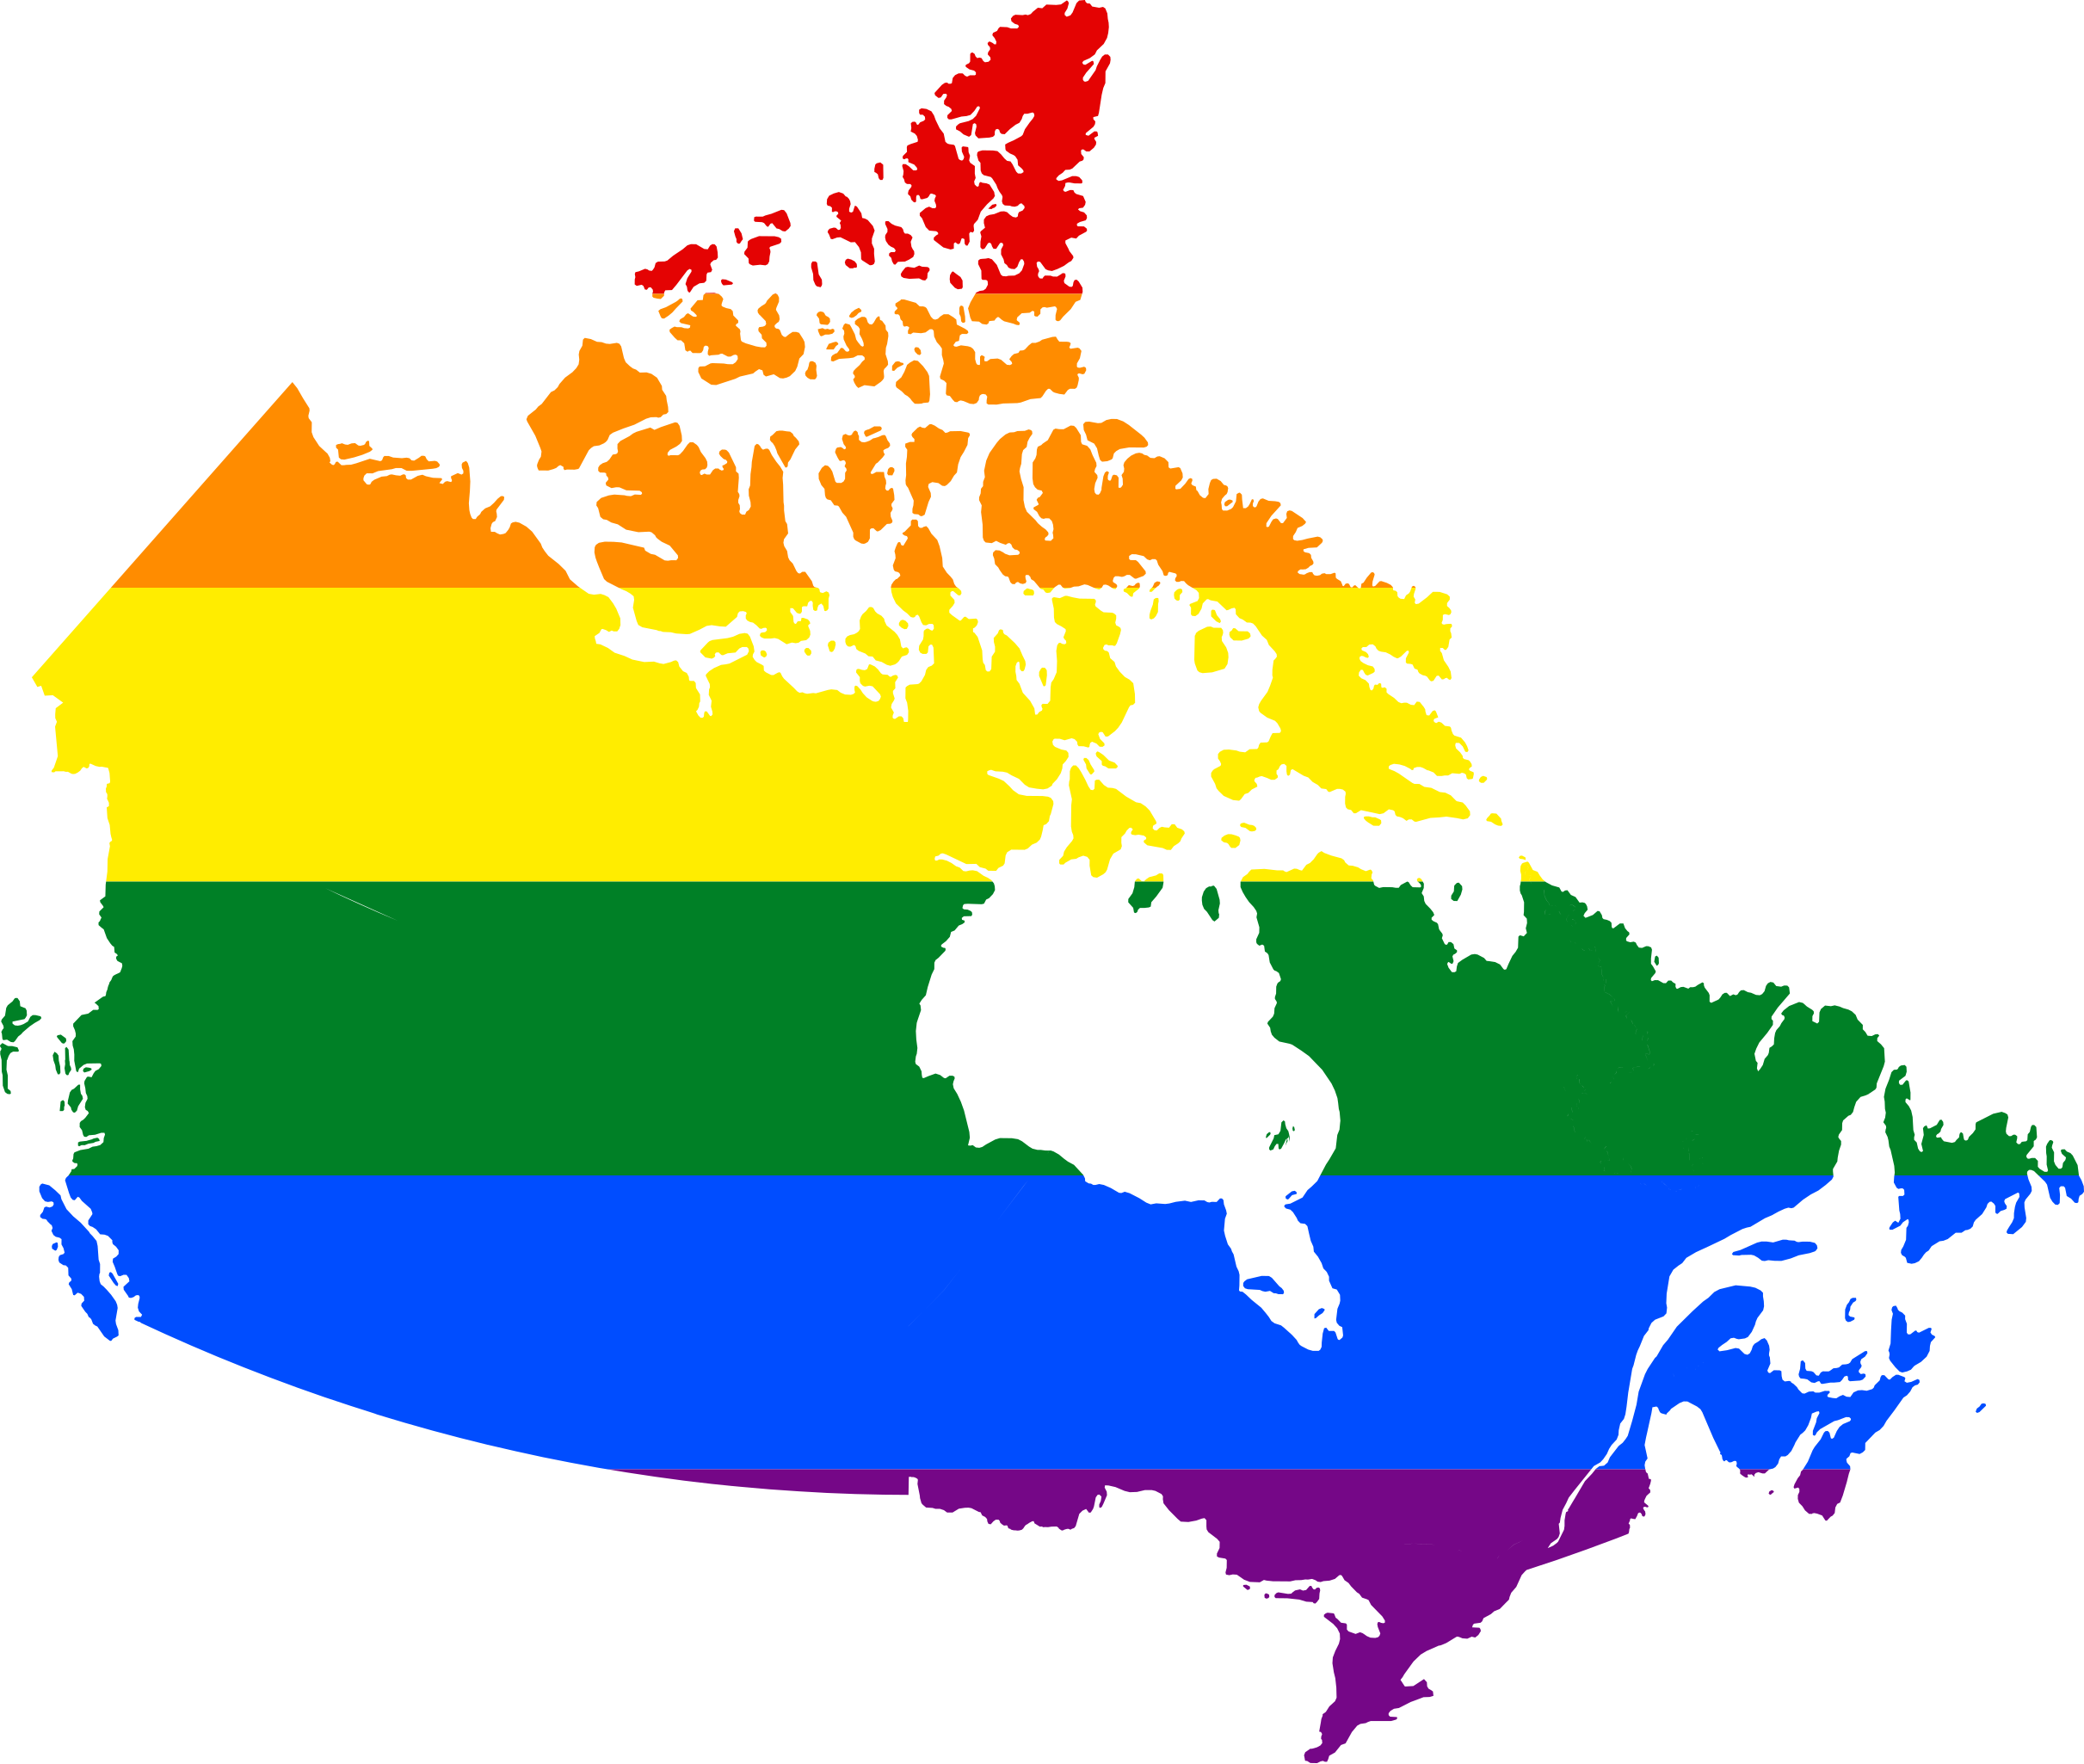 File:Canada flag map.svg - Wikimedia Commons